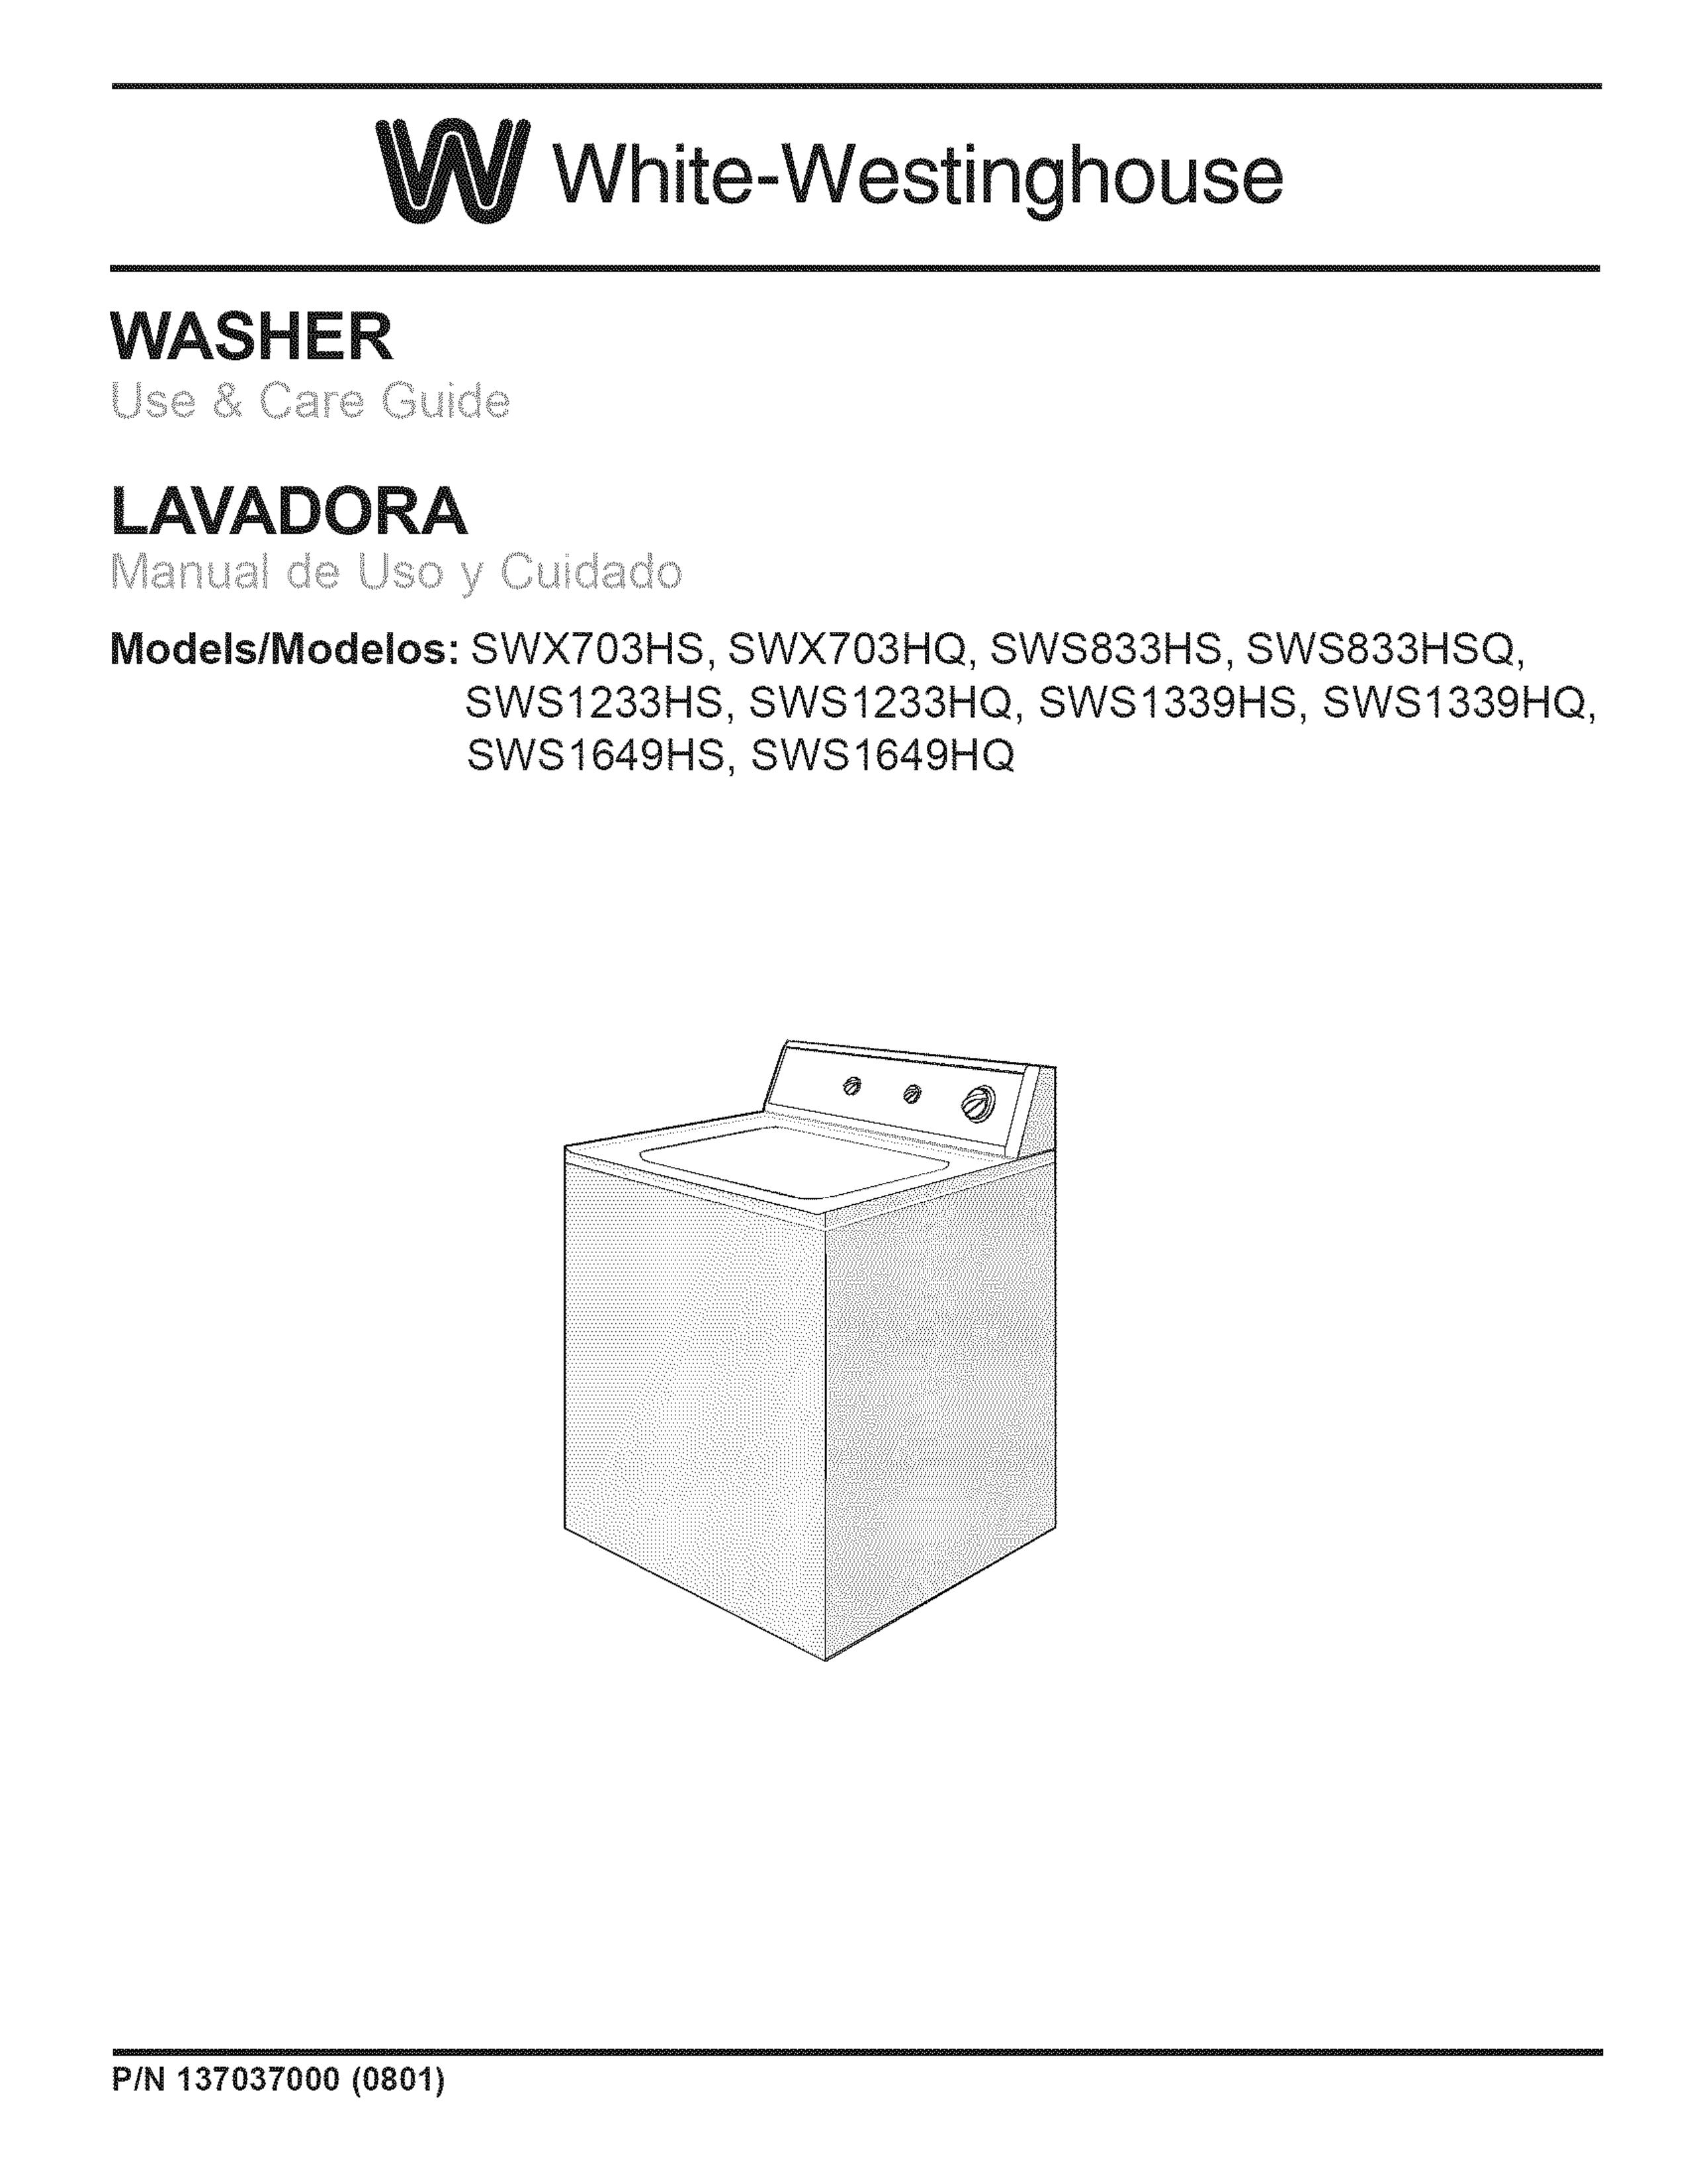 White-Westinghouse SWS833HSQ Washer User Manual